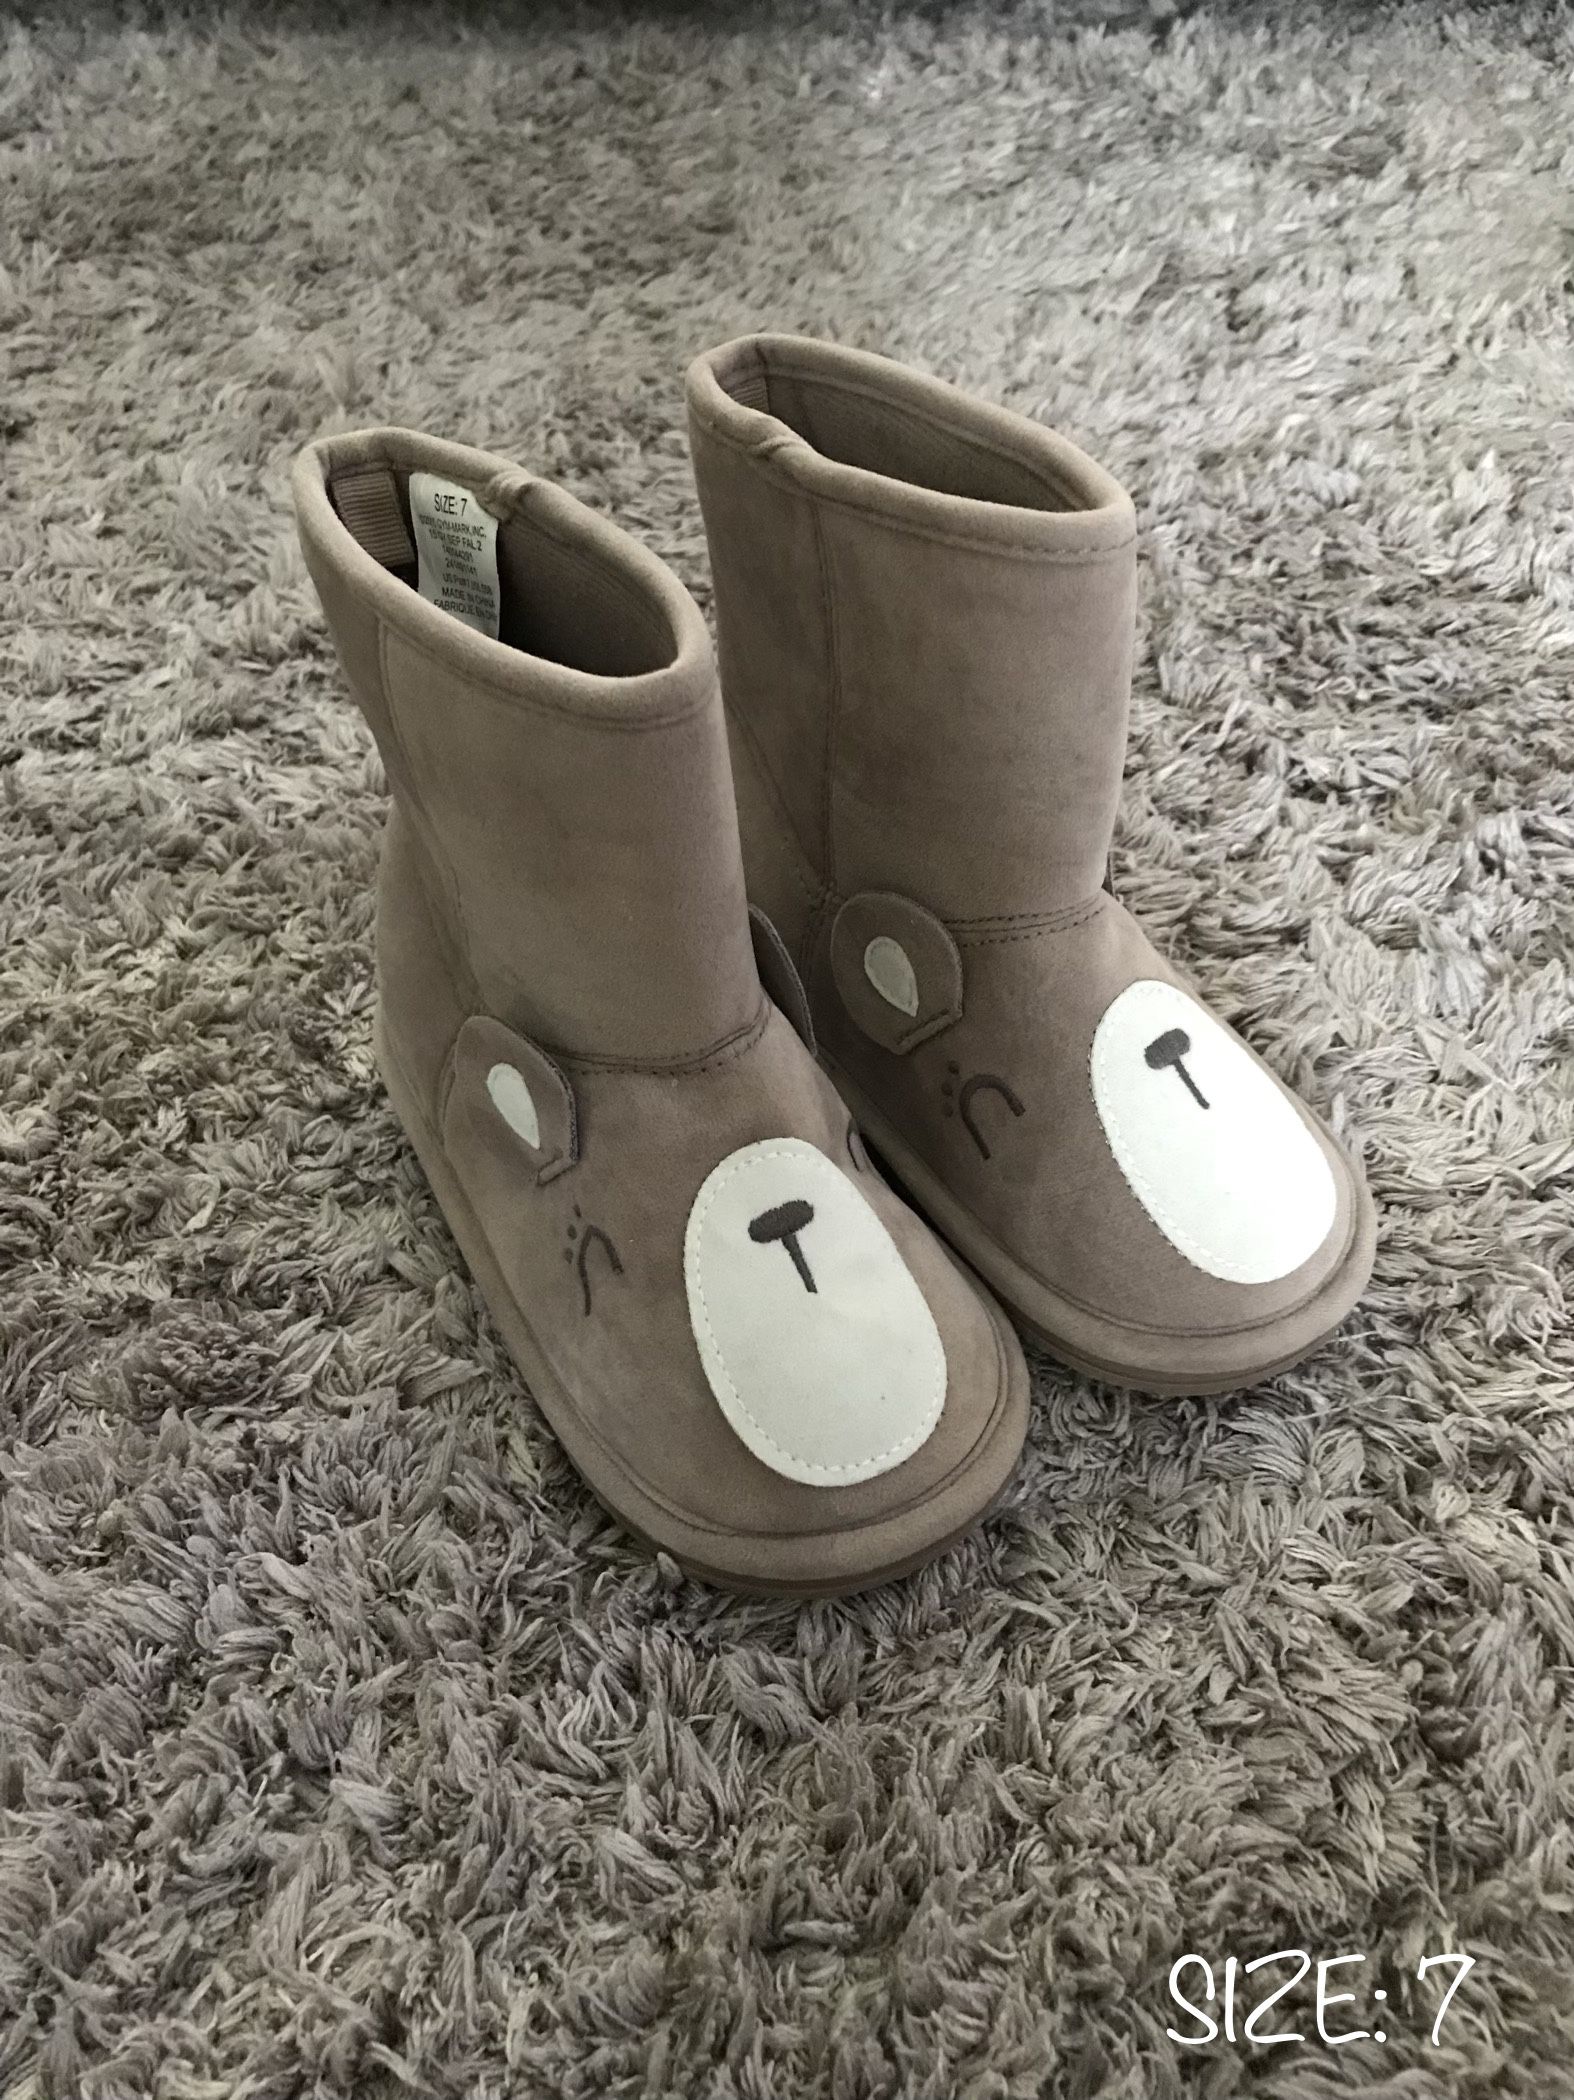 LIKE NEW‼️ TODDLER BABY GIRL BEAR WINTER BOOTS - SIZE 7